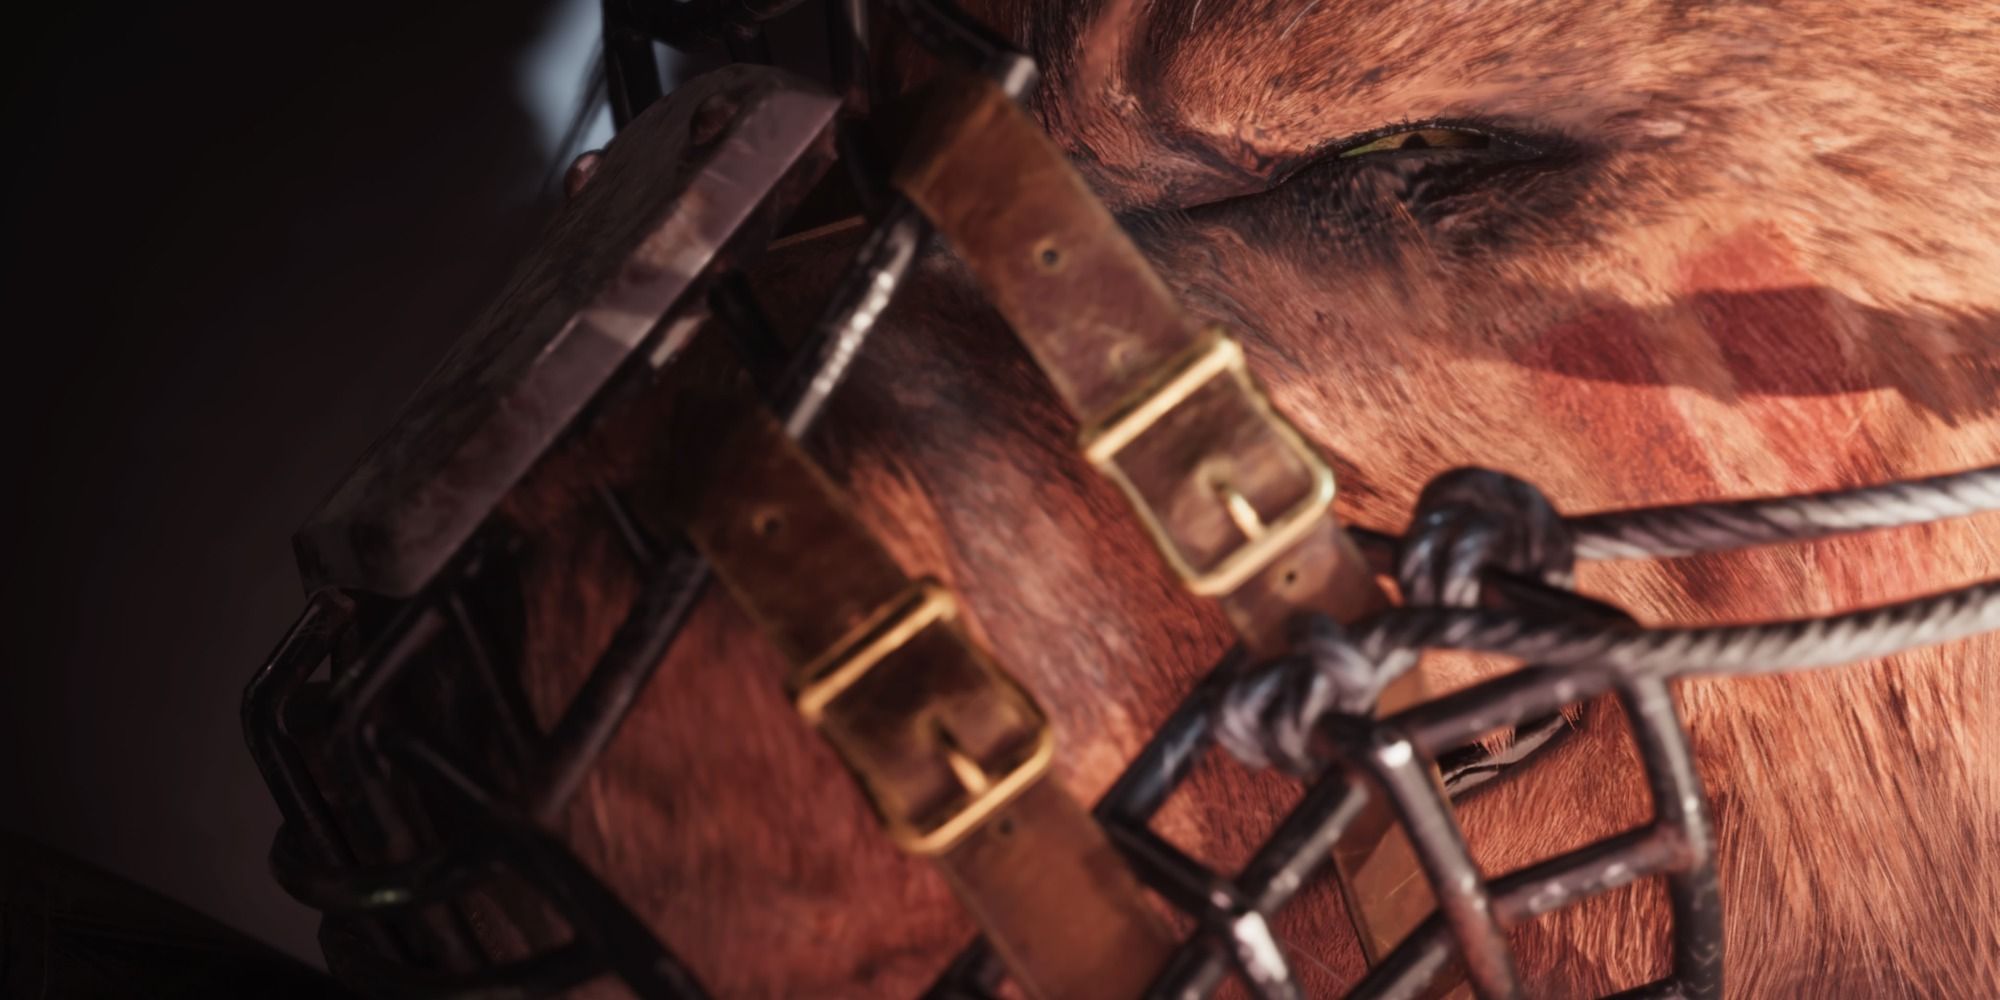 Closeup of Red XIII with a muzzle on